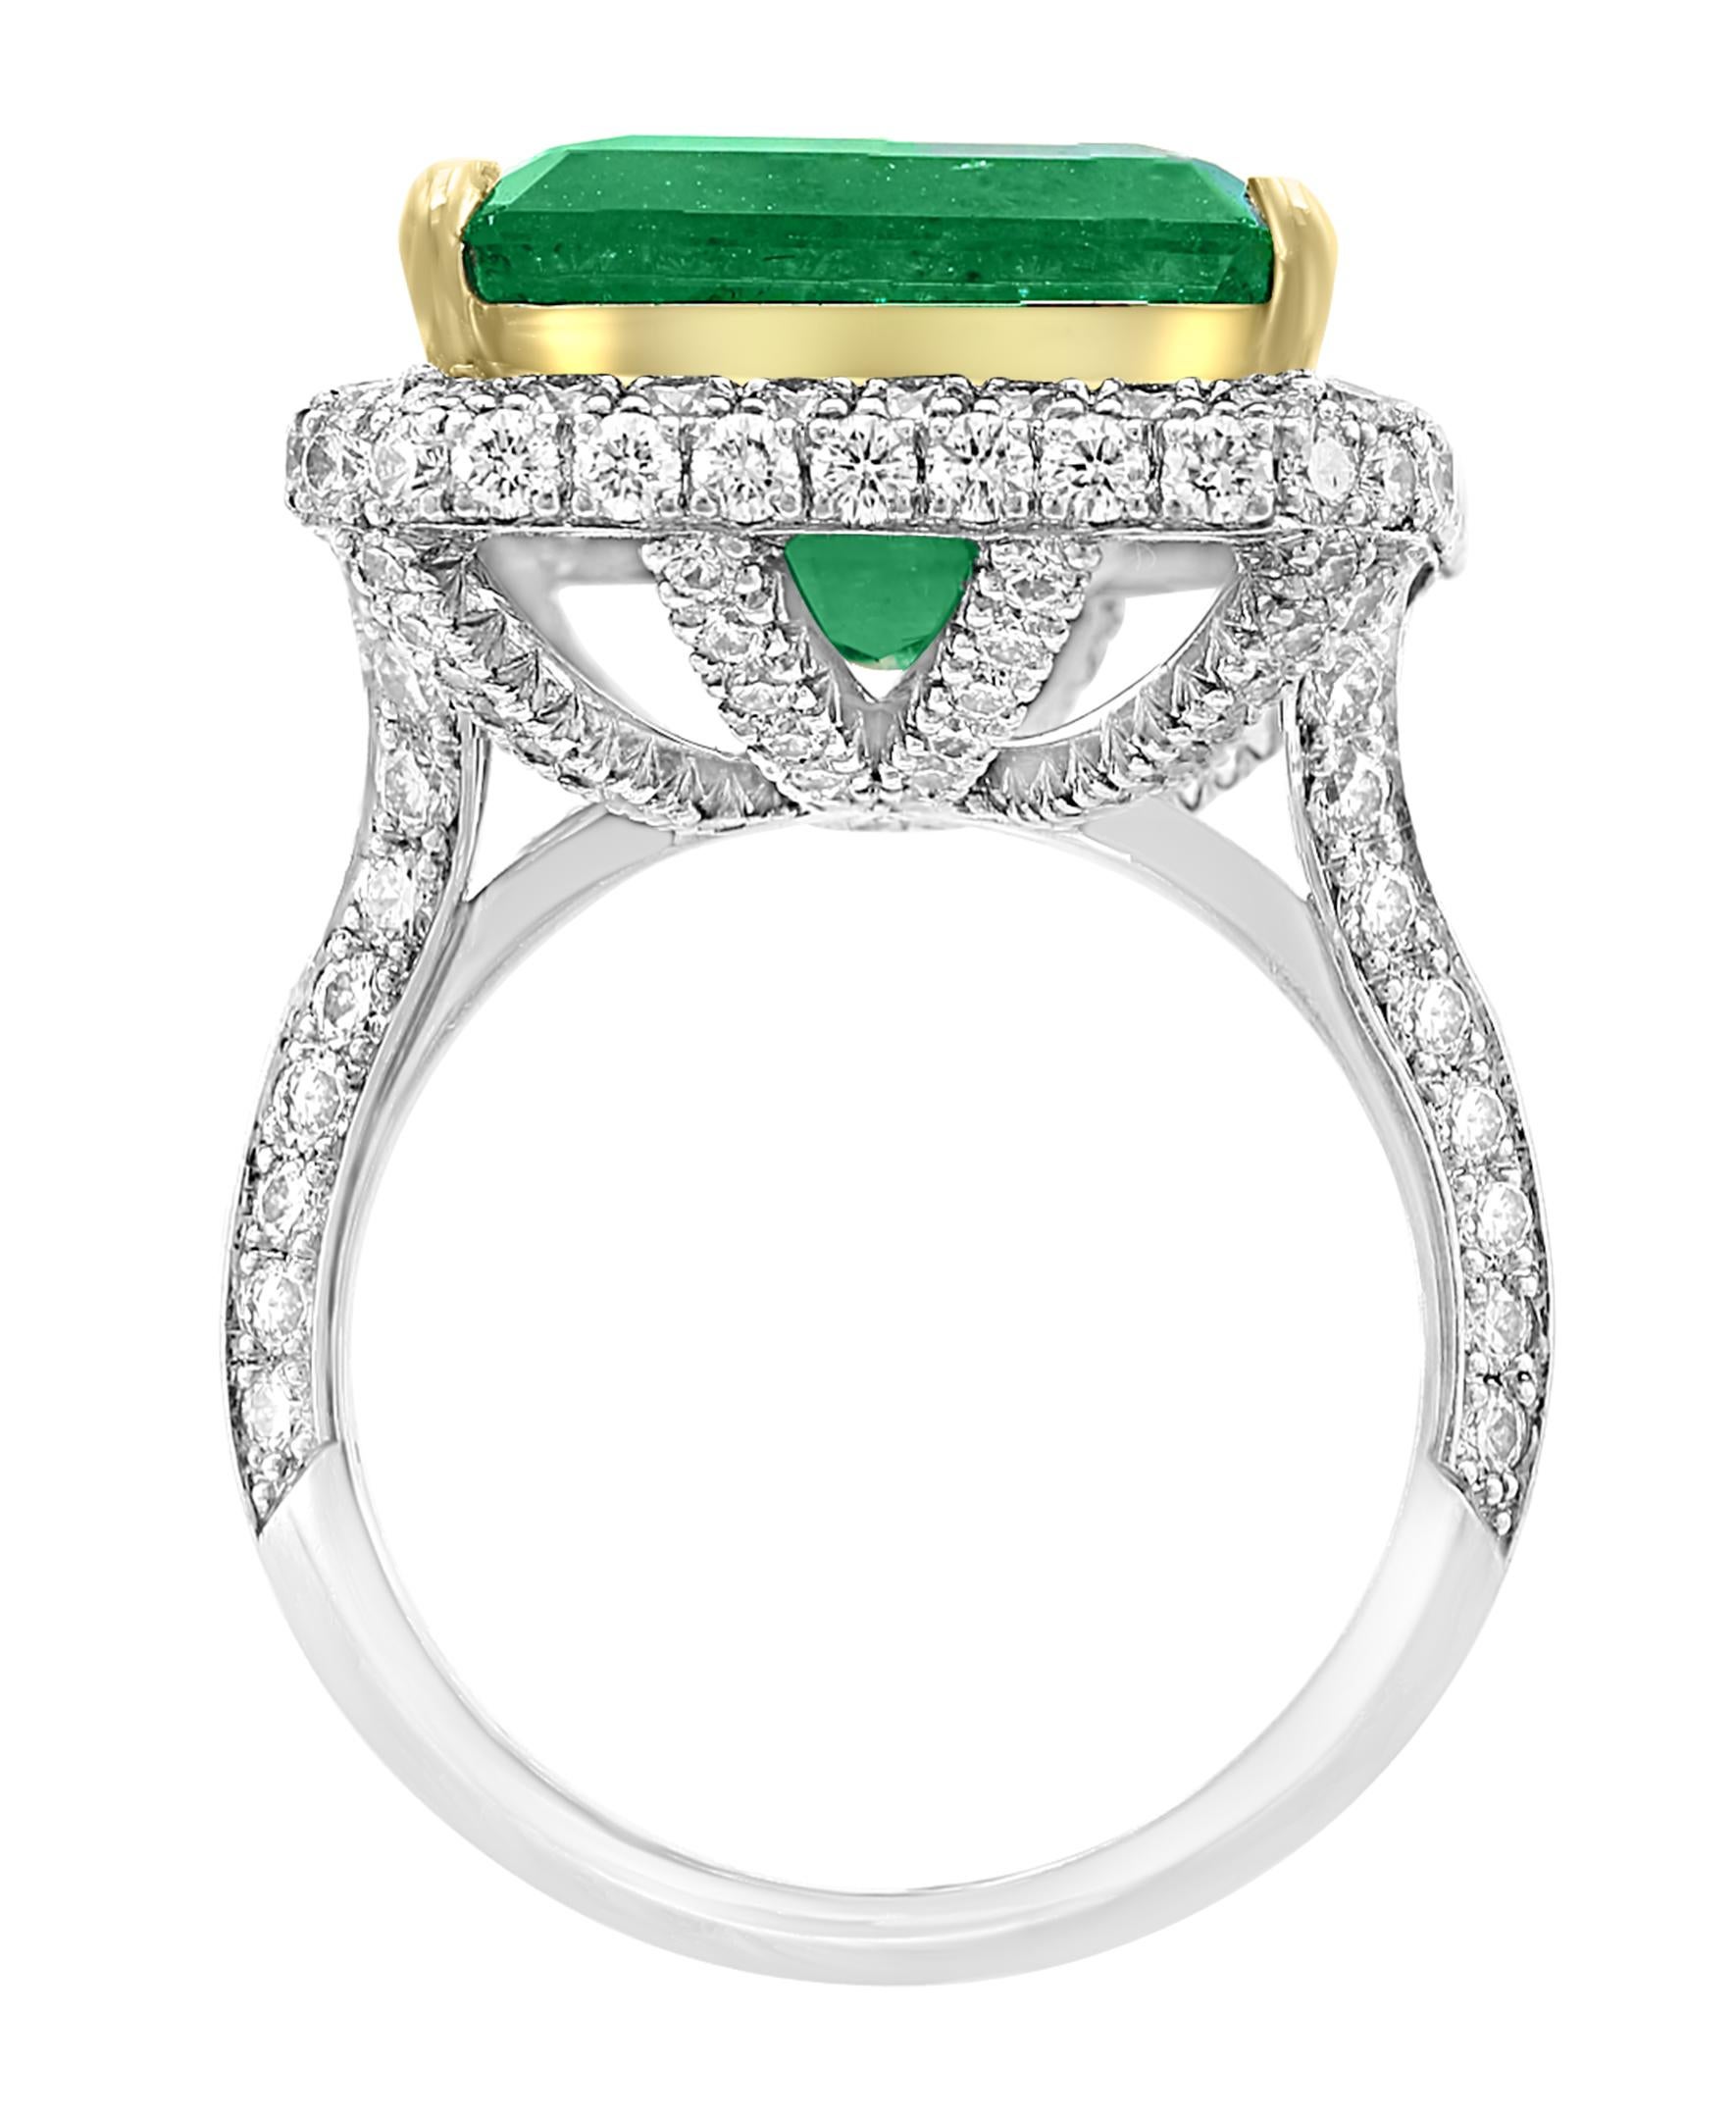 AGL Certified 13.10 Ct Emerald Cut Colombian Emerald Diamond 18K Gold Ring For Sale 1